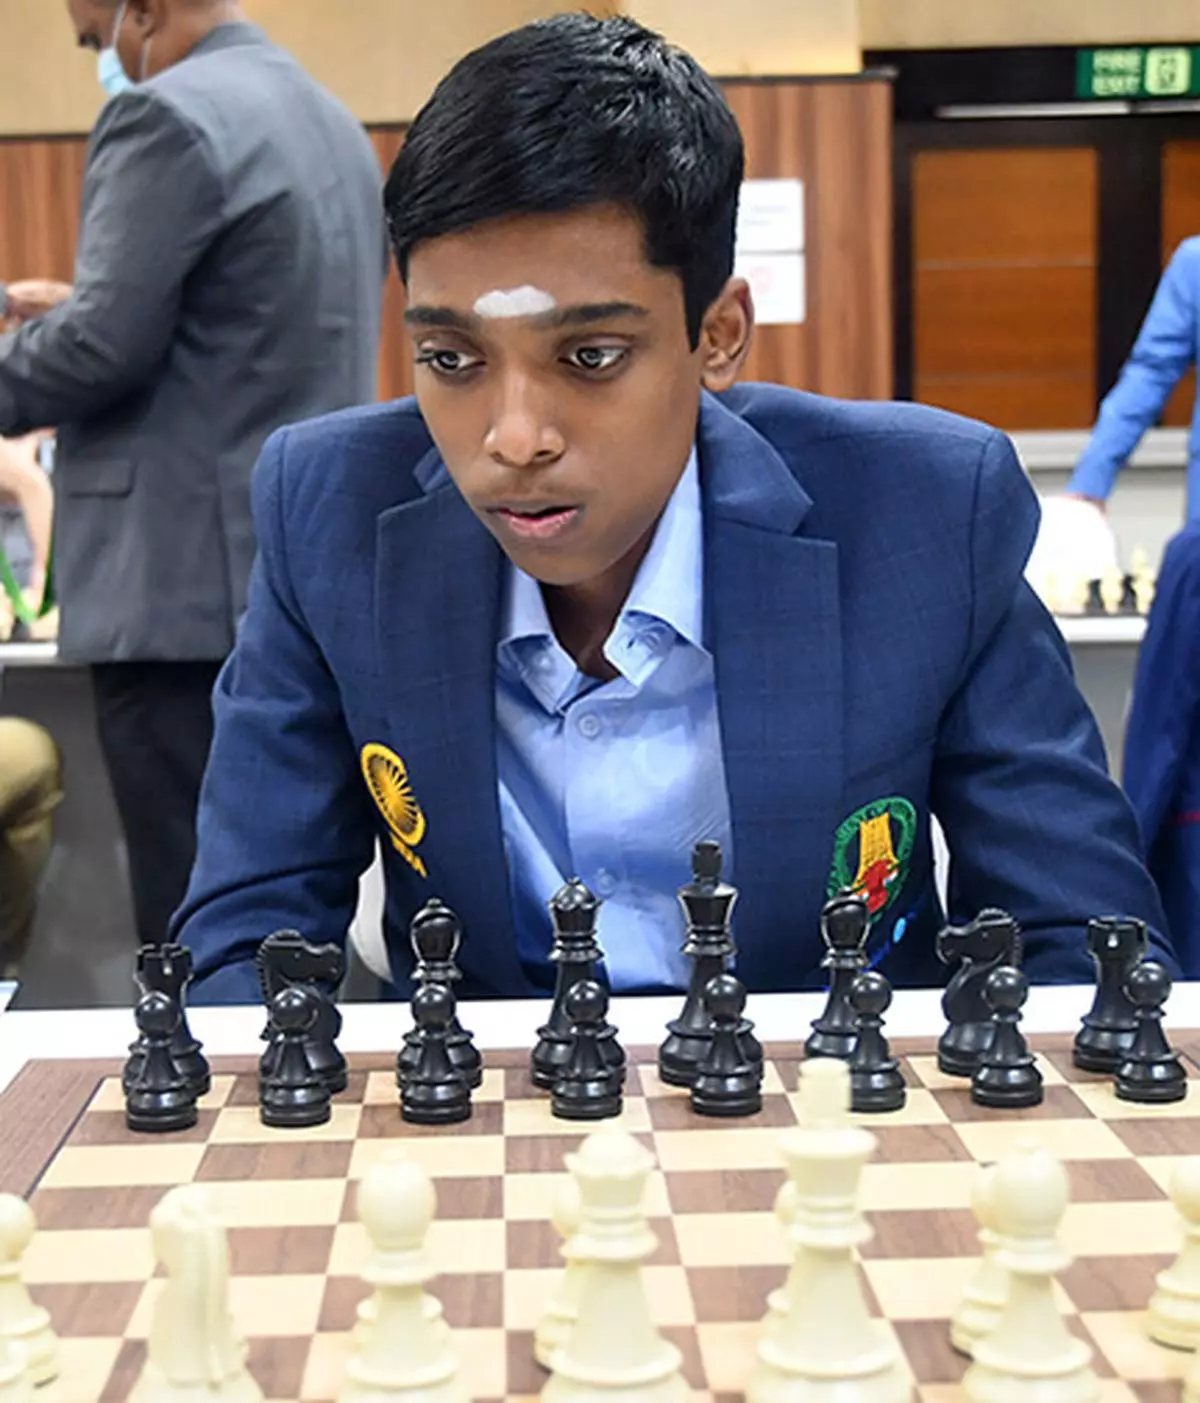 A file photo of the Indian GM Praggnanandhaa playing at the 44th Chess Olympiad held at Chennai. 